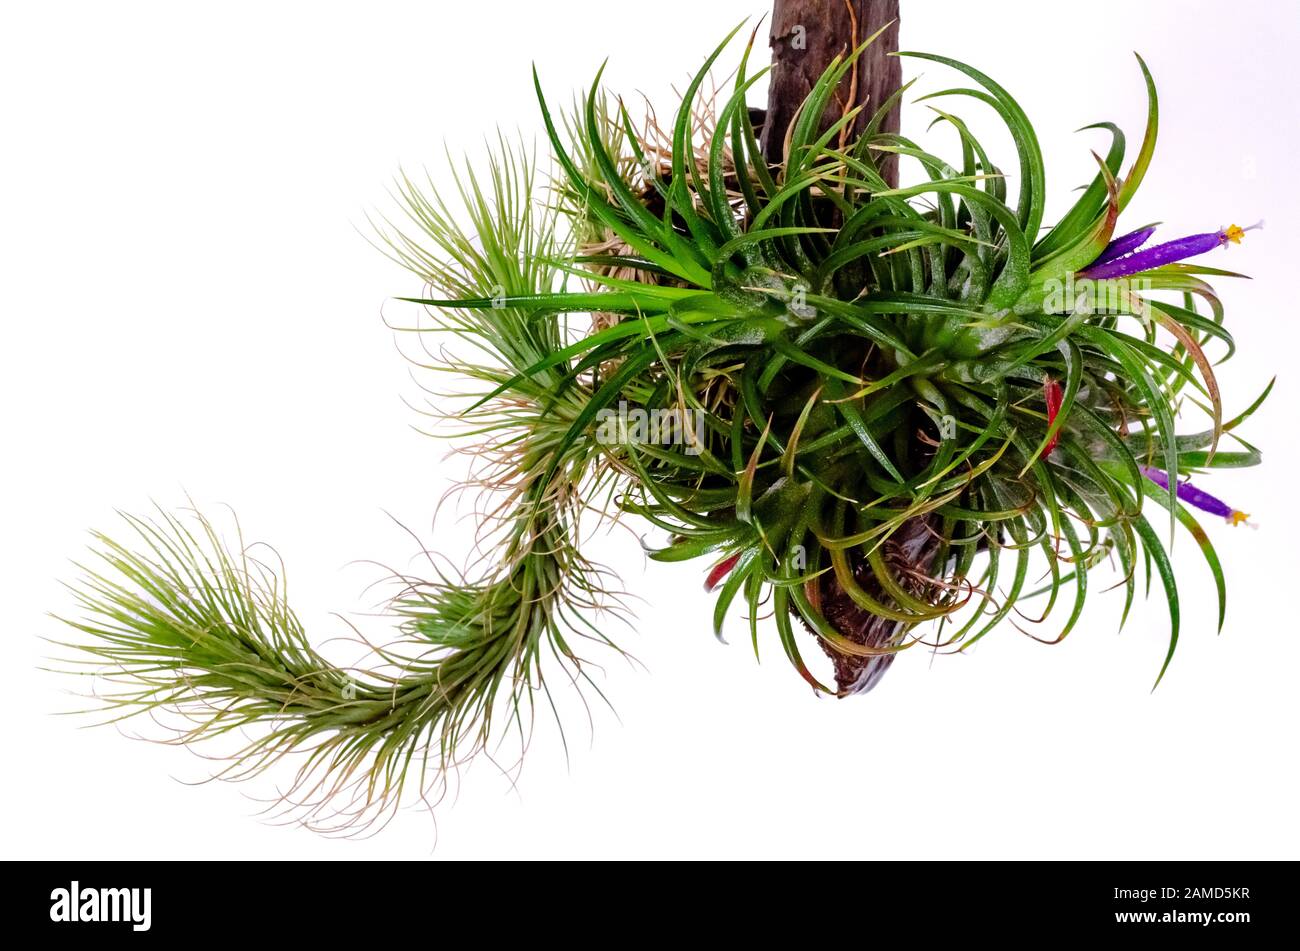 Tillandsia or Air plant which is grows without soil blooming with colorfulf flowers attached at the wood on white background. Stock Photo